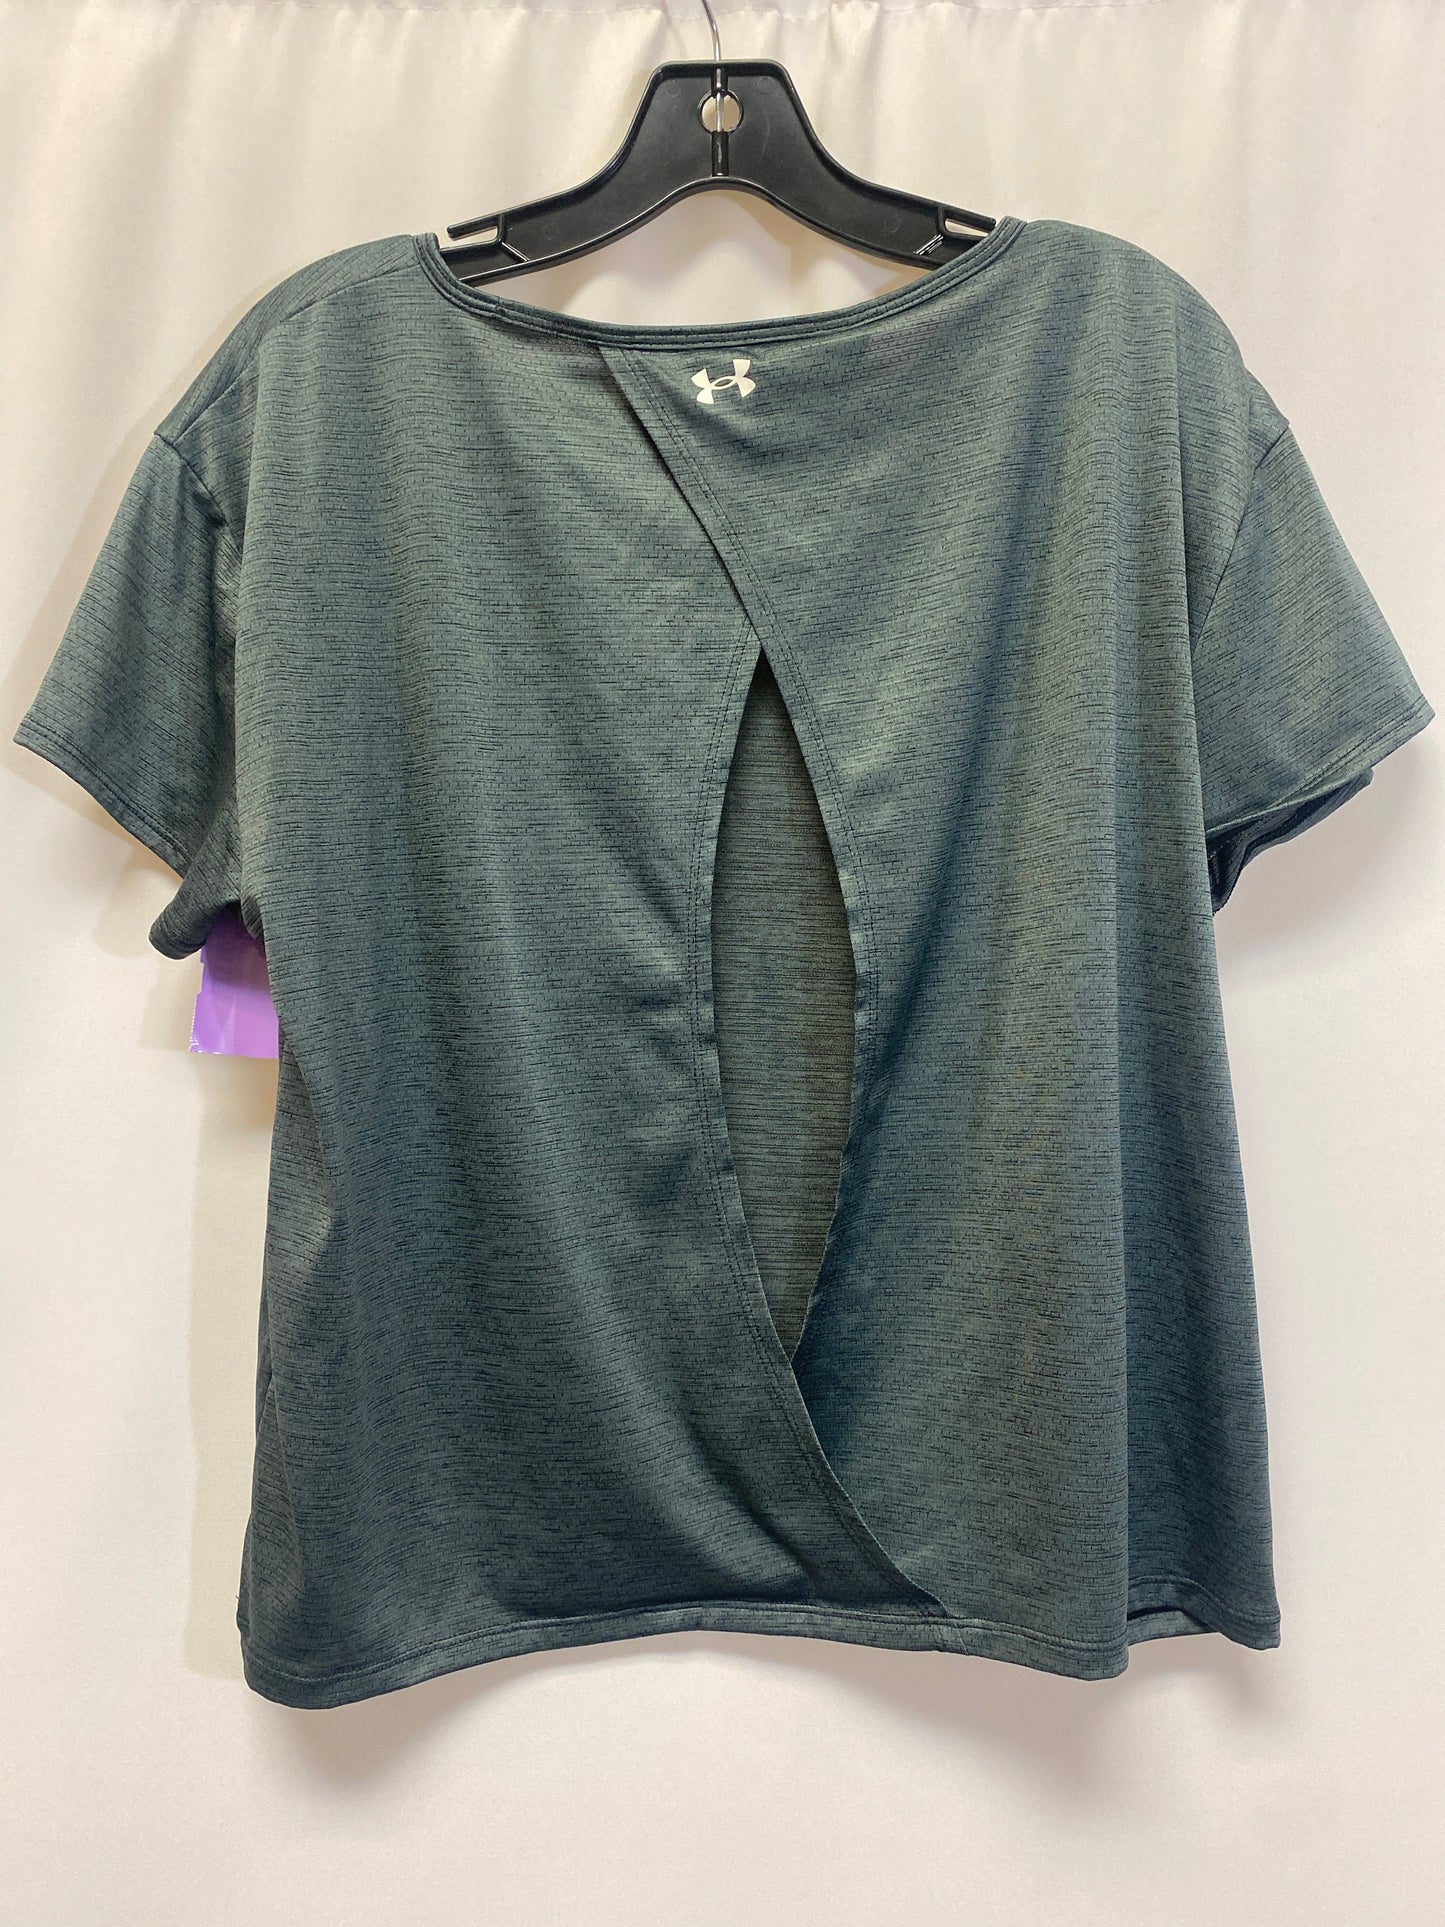 Grey Athletic Top Short Sleeve Under Armour, Size L